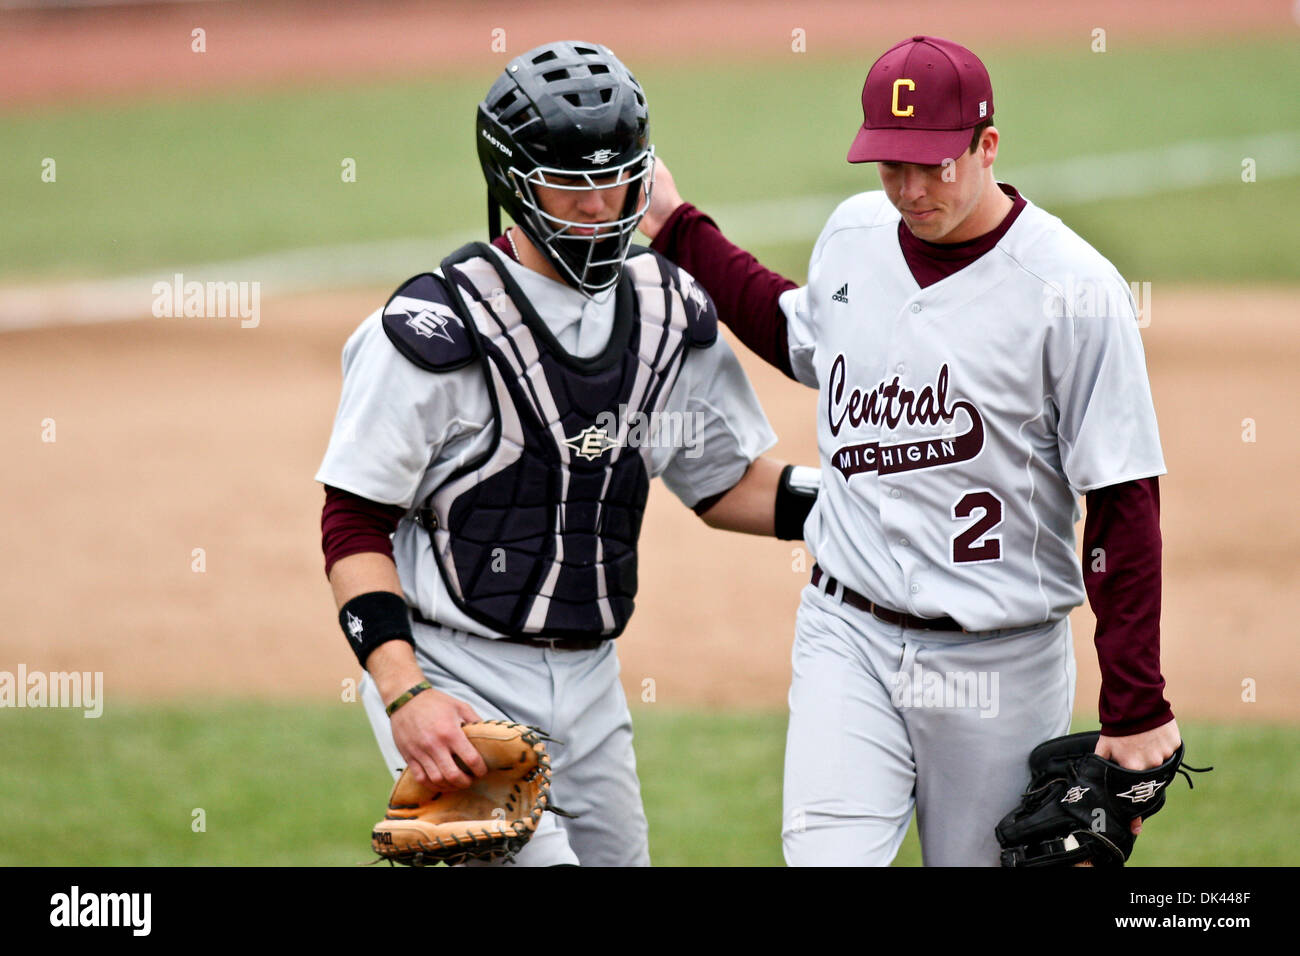 Mar. 19, 2011 - Columbia, Missouri, U.S - CMU catcher Matt Stevens (11) chats with CMU pitcher Reid Rooney (2) during a Div.1 NCAA baseball game between the Missouri Tigers and the Central Michigan University Chippewas in Taylor Stadium at Simmons Field on the campus of the University of Missouri in Columbia Missouri. Missouri defeated Michigan 14-7. (Credit Image: © Scott Kane/Sou Stock Photo